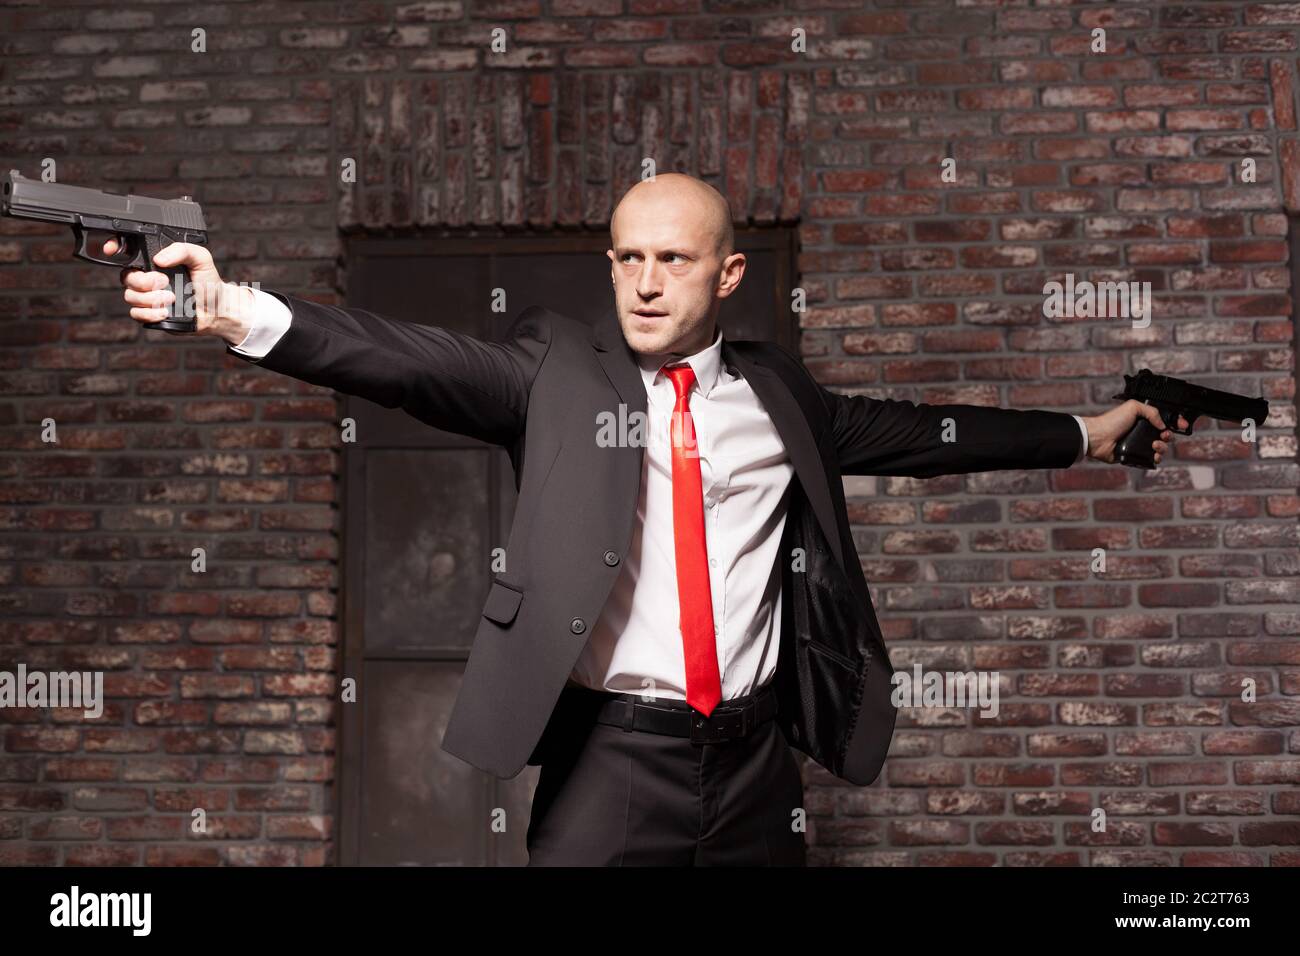 Serious contract killer shooting action wallpaper, background or poster. Bald assassin in red tie fires a pistols with two hands on city street. Profe Stock Photo